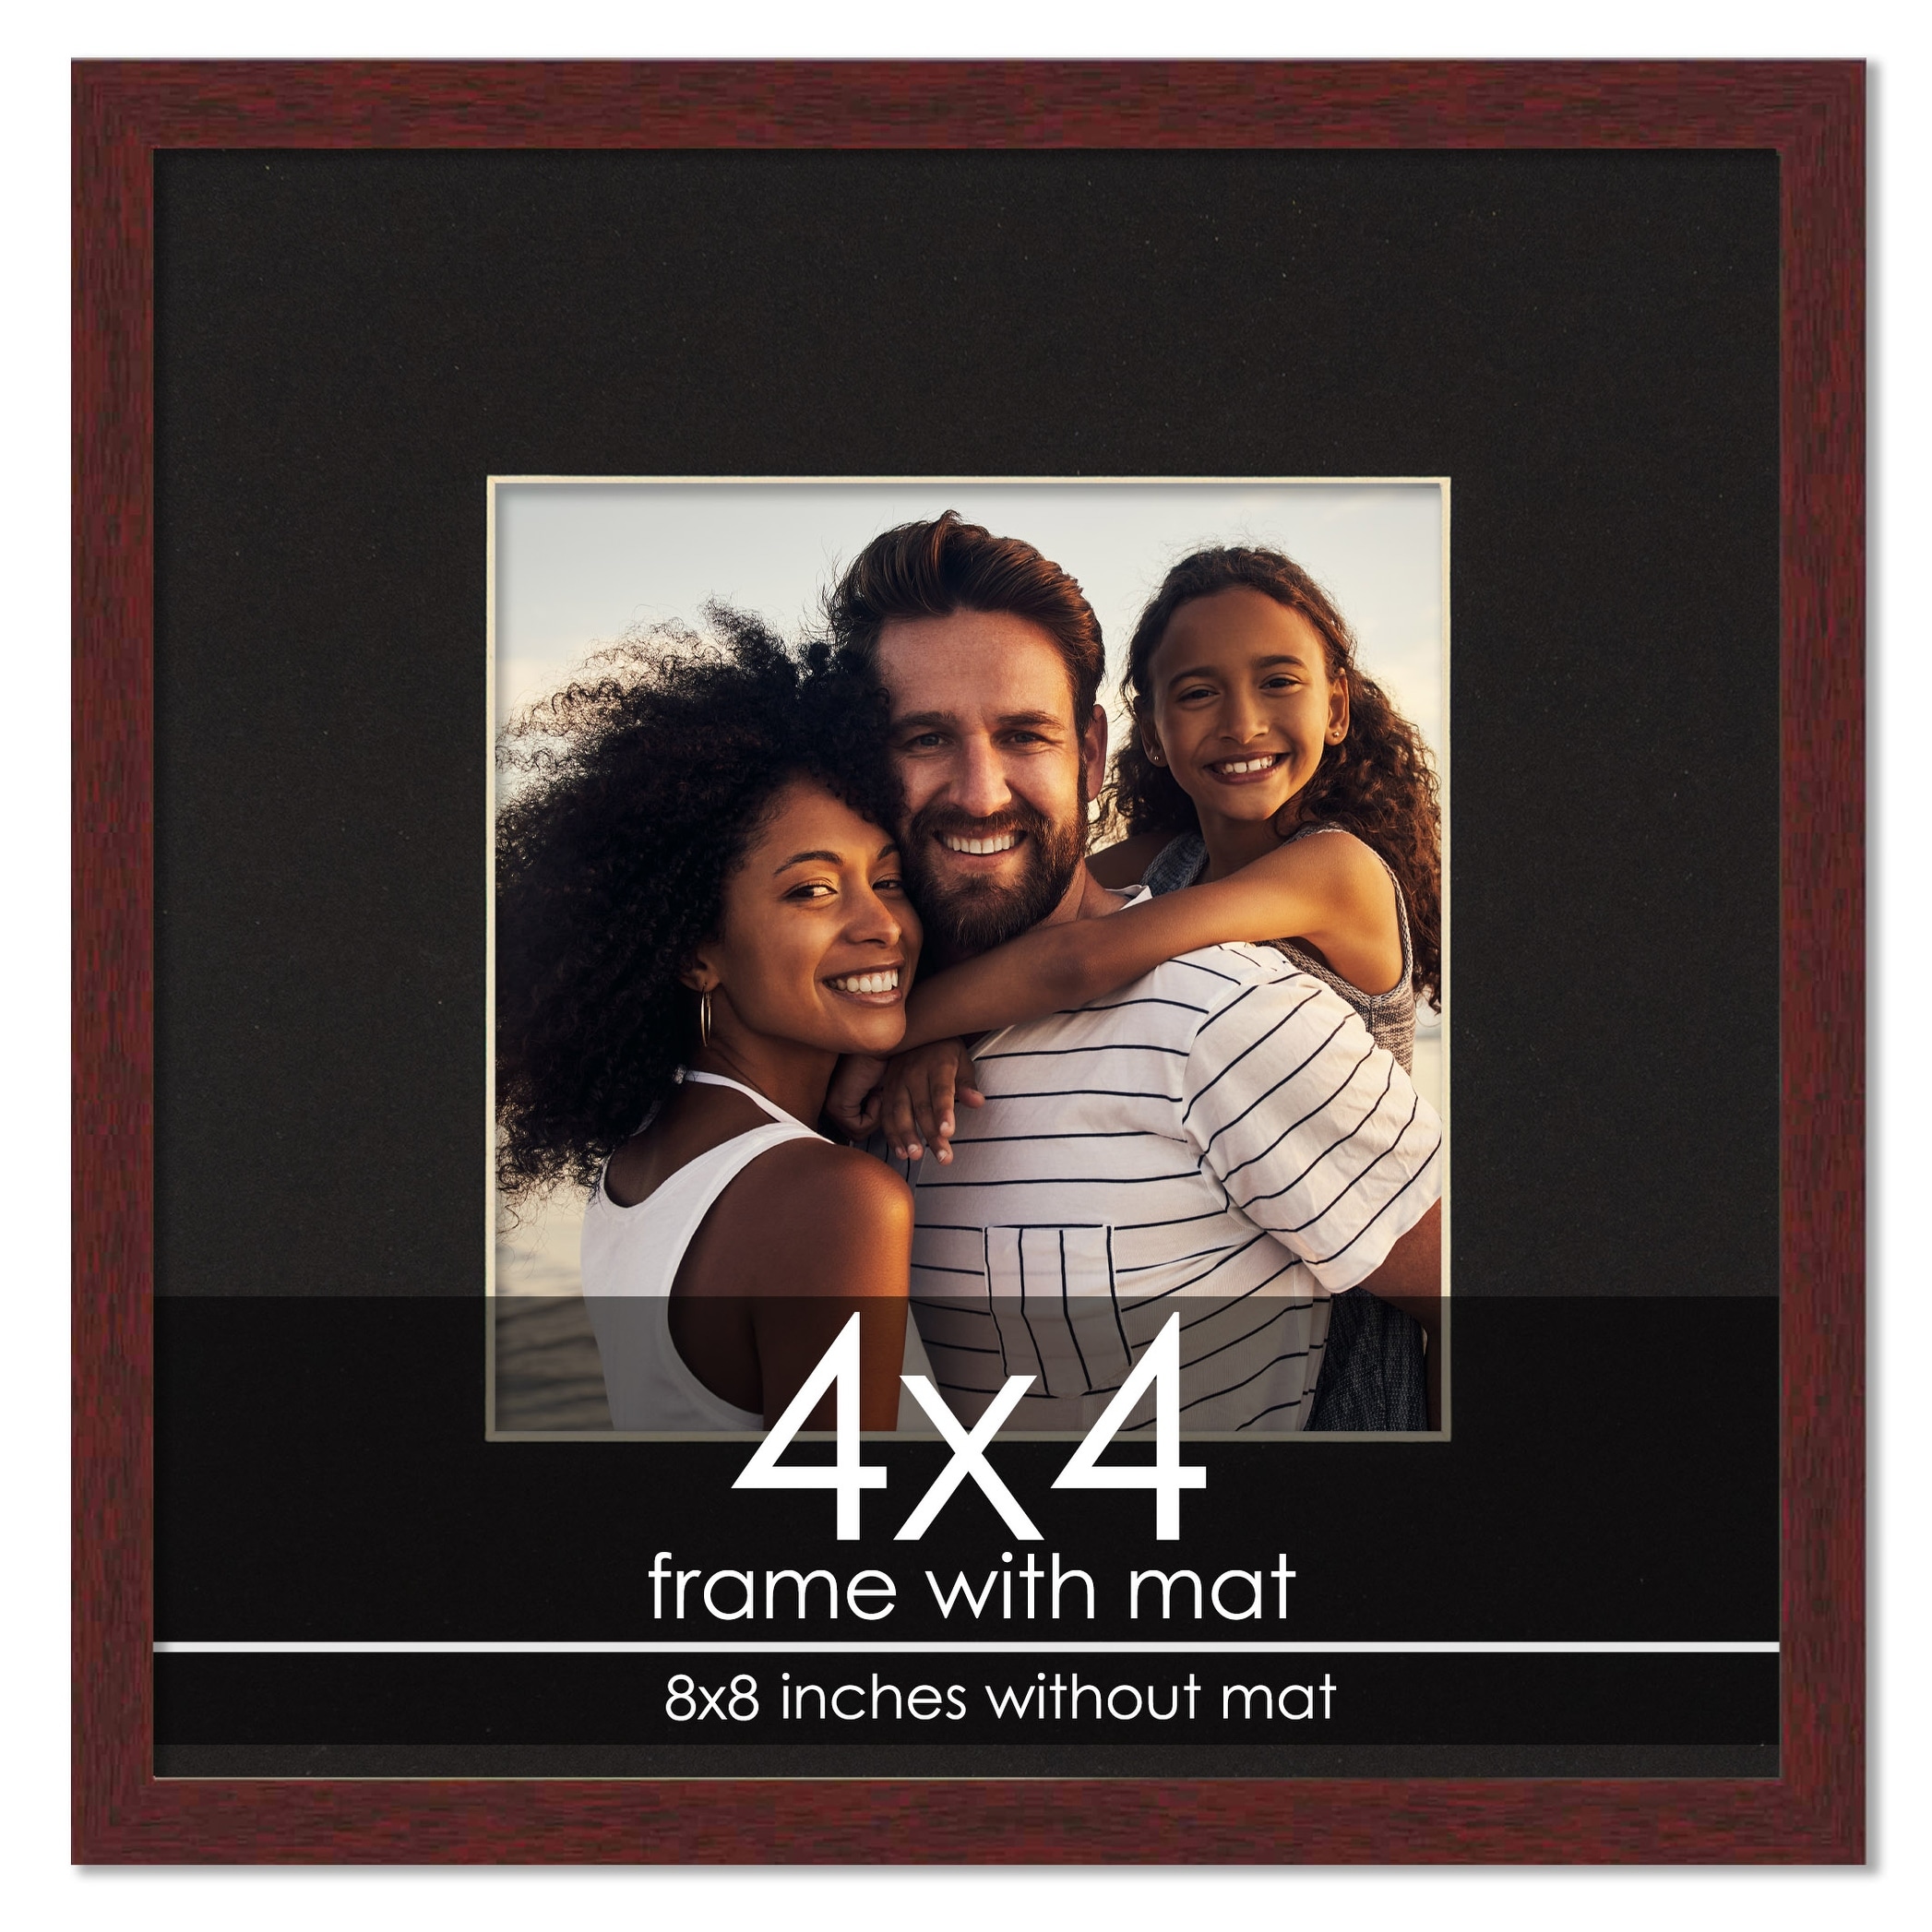 4x4 Frame with Mat - Brown 8x8 Frame Wood Made to Display Print or Poster Measuring 4 x 4 Inches with White Photo Mat